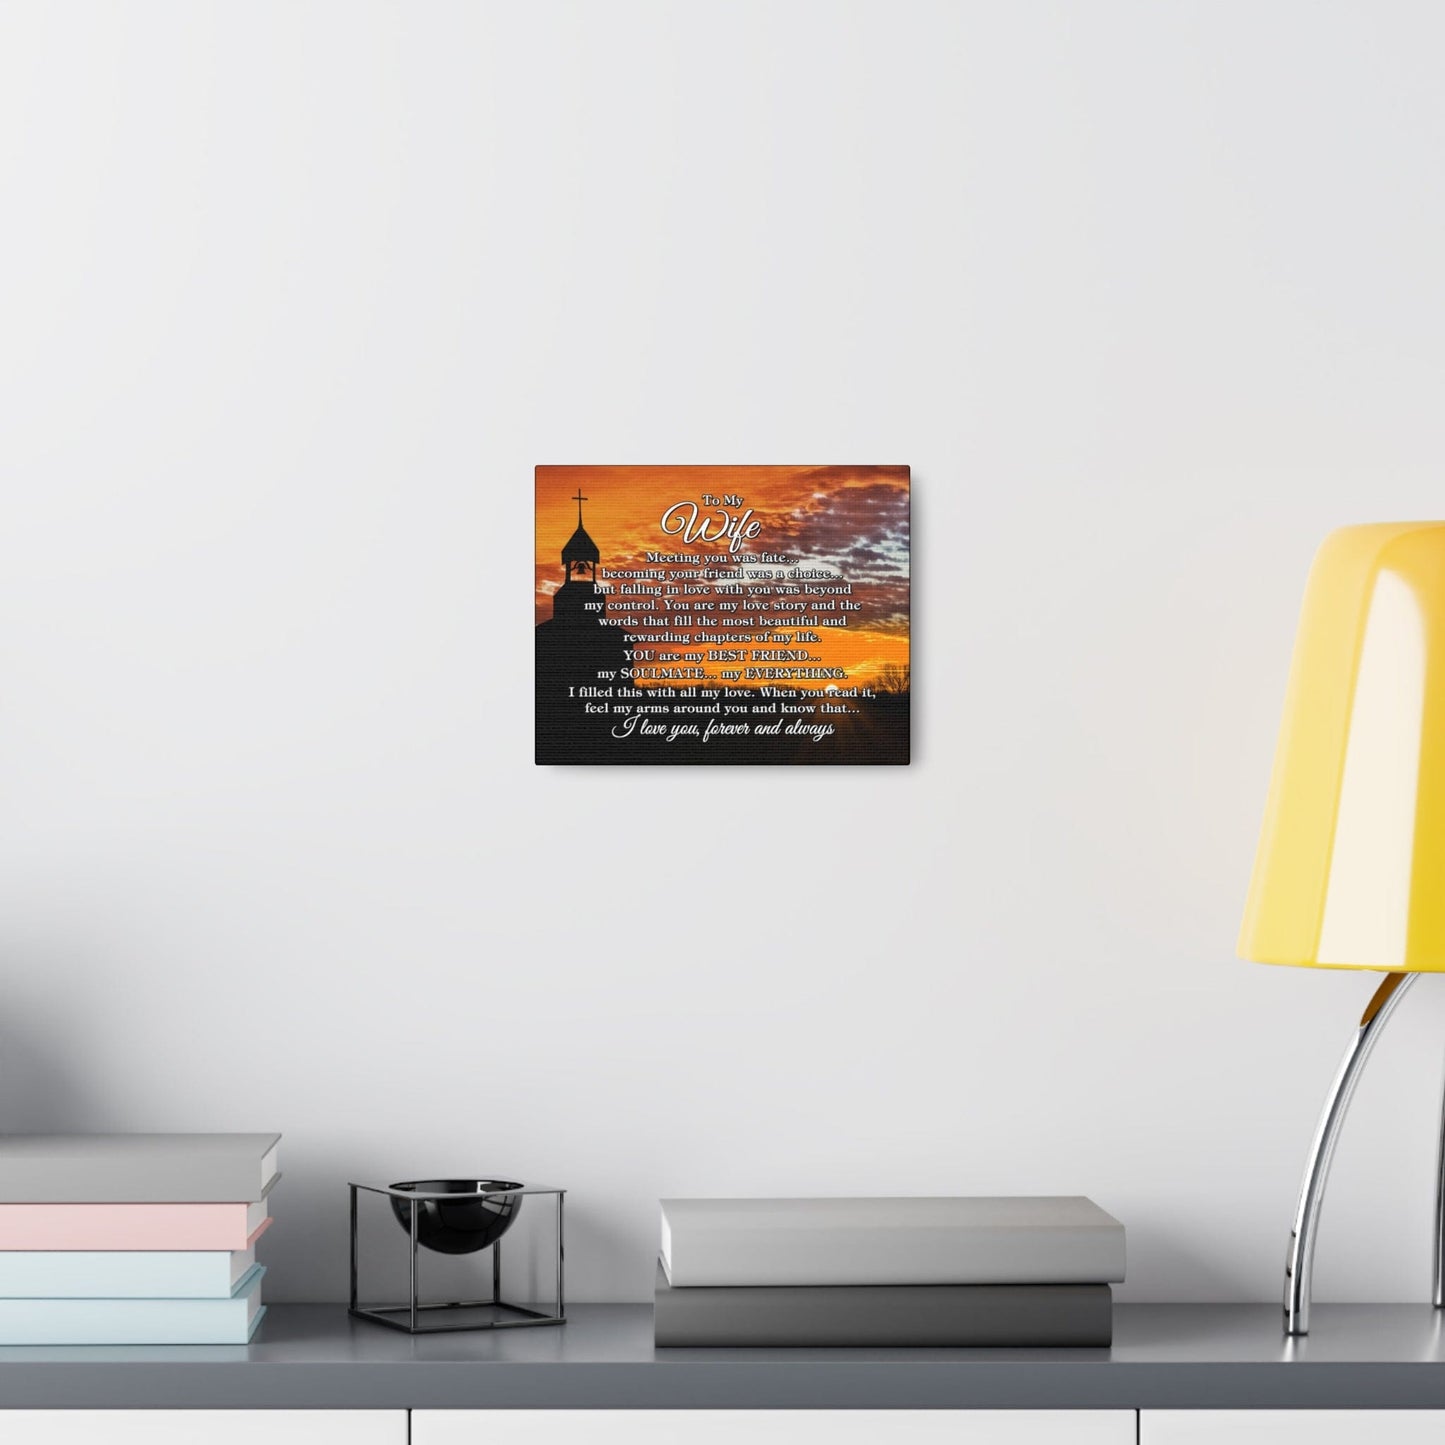 To My Wife "Meeting you was..." Canvas Gallery Wrap (Country Church Sunset)